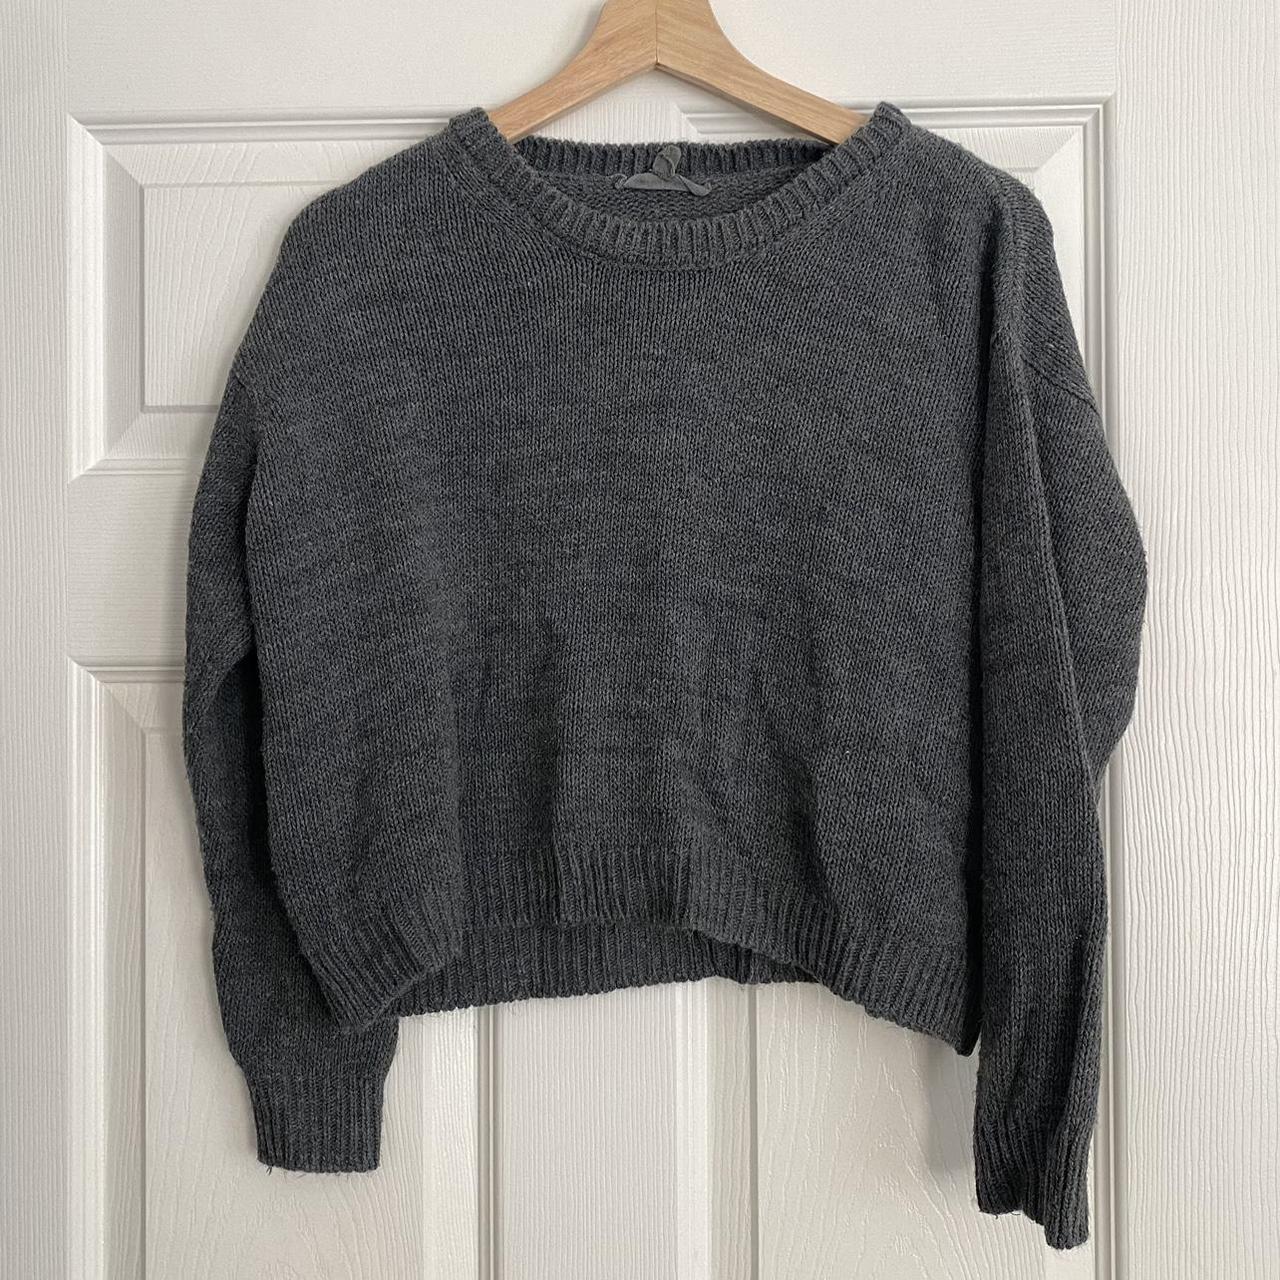 Knitted slate grey cropped sweater. Tag says ‘one... - Depop